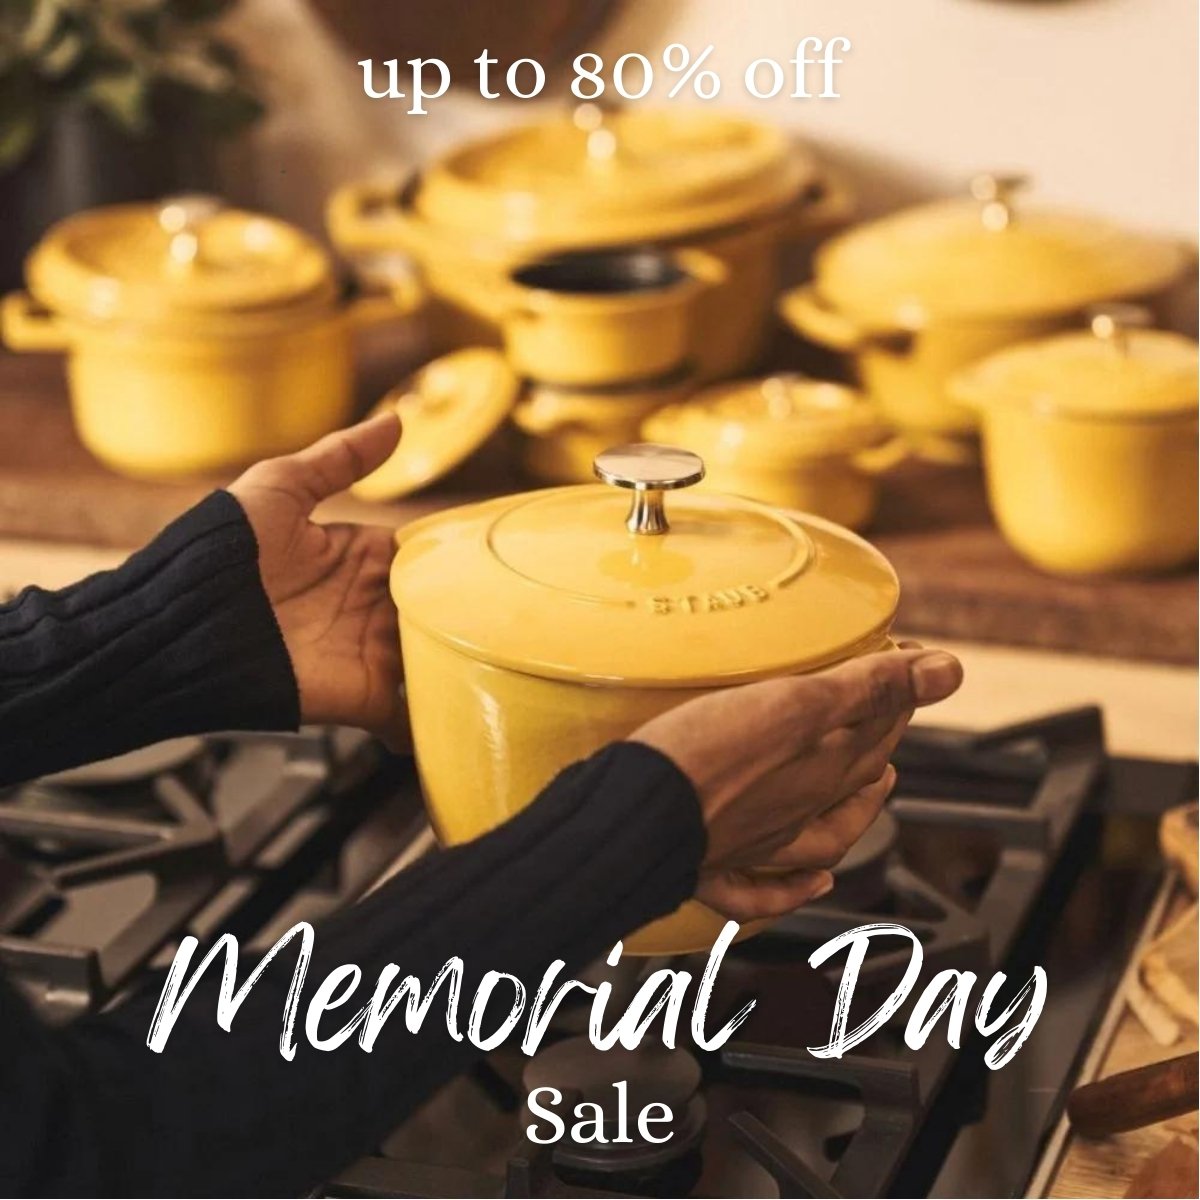 Save up to 80% Memorial Day Sale